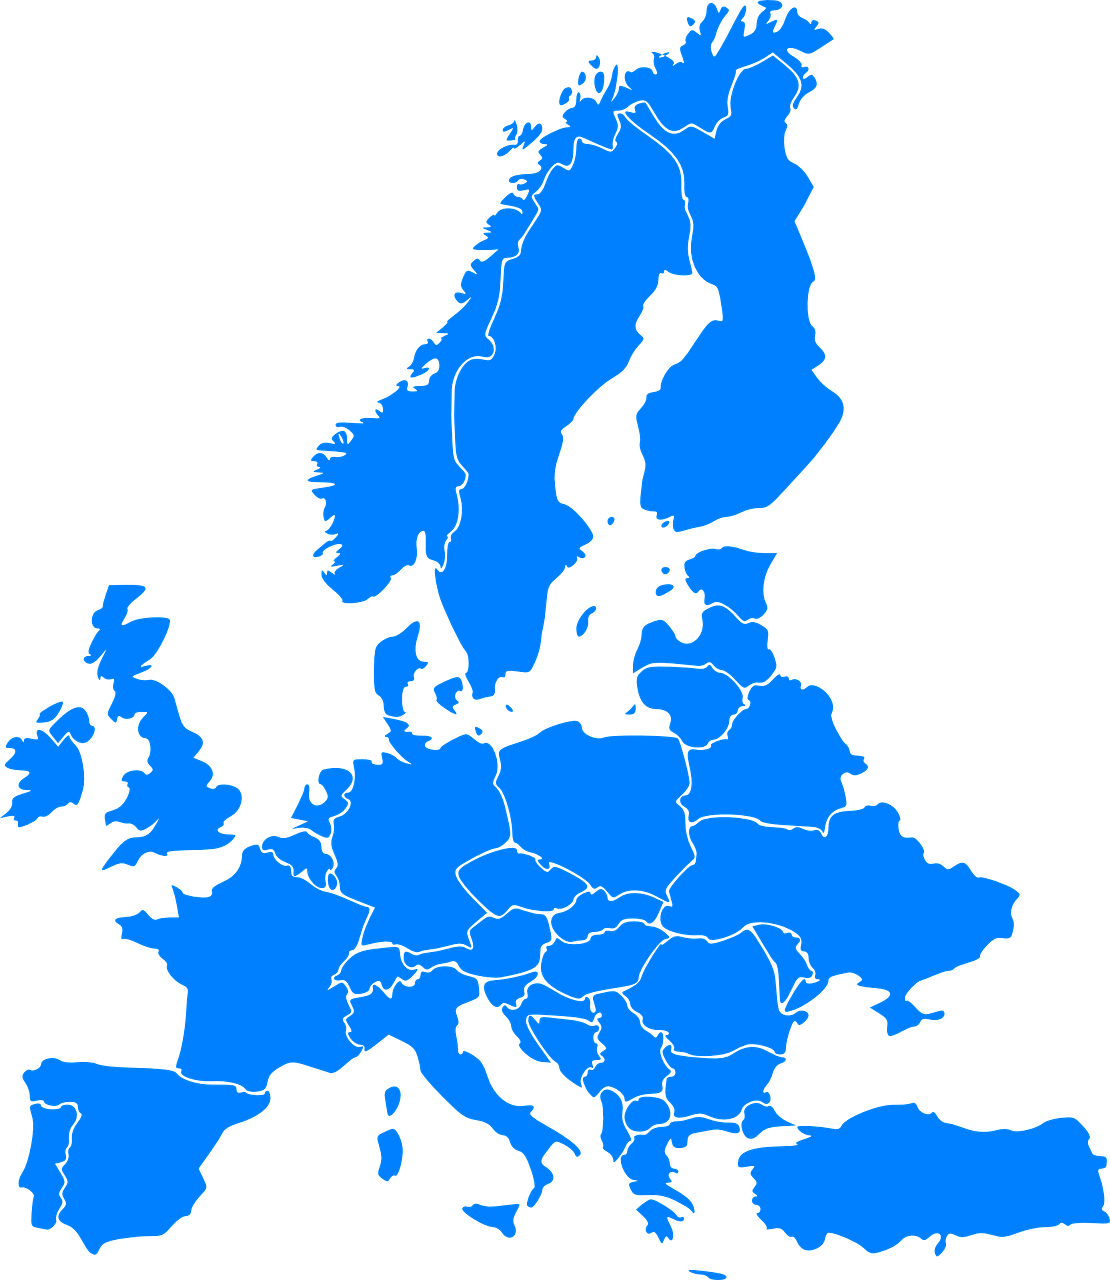 Blue Europe Map Background PNG Image